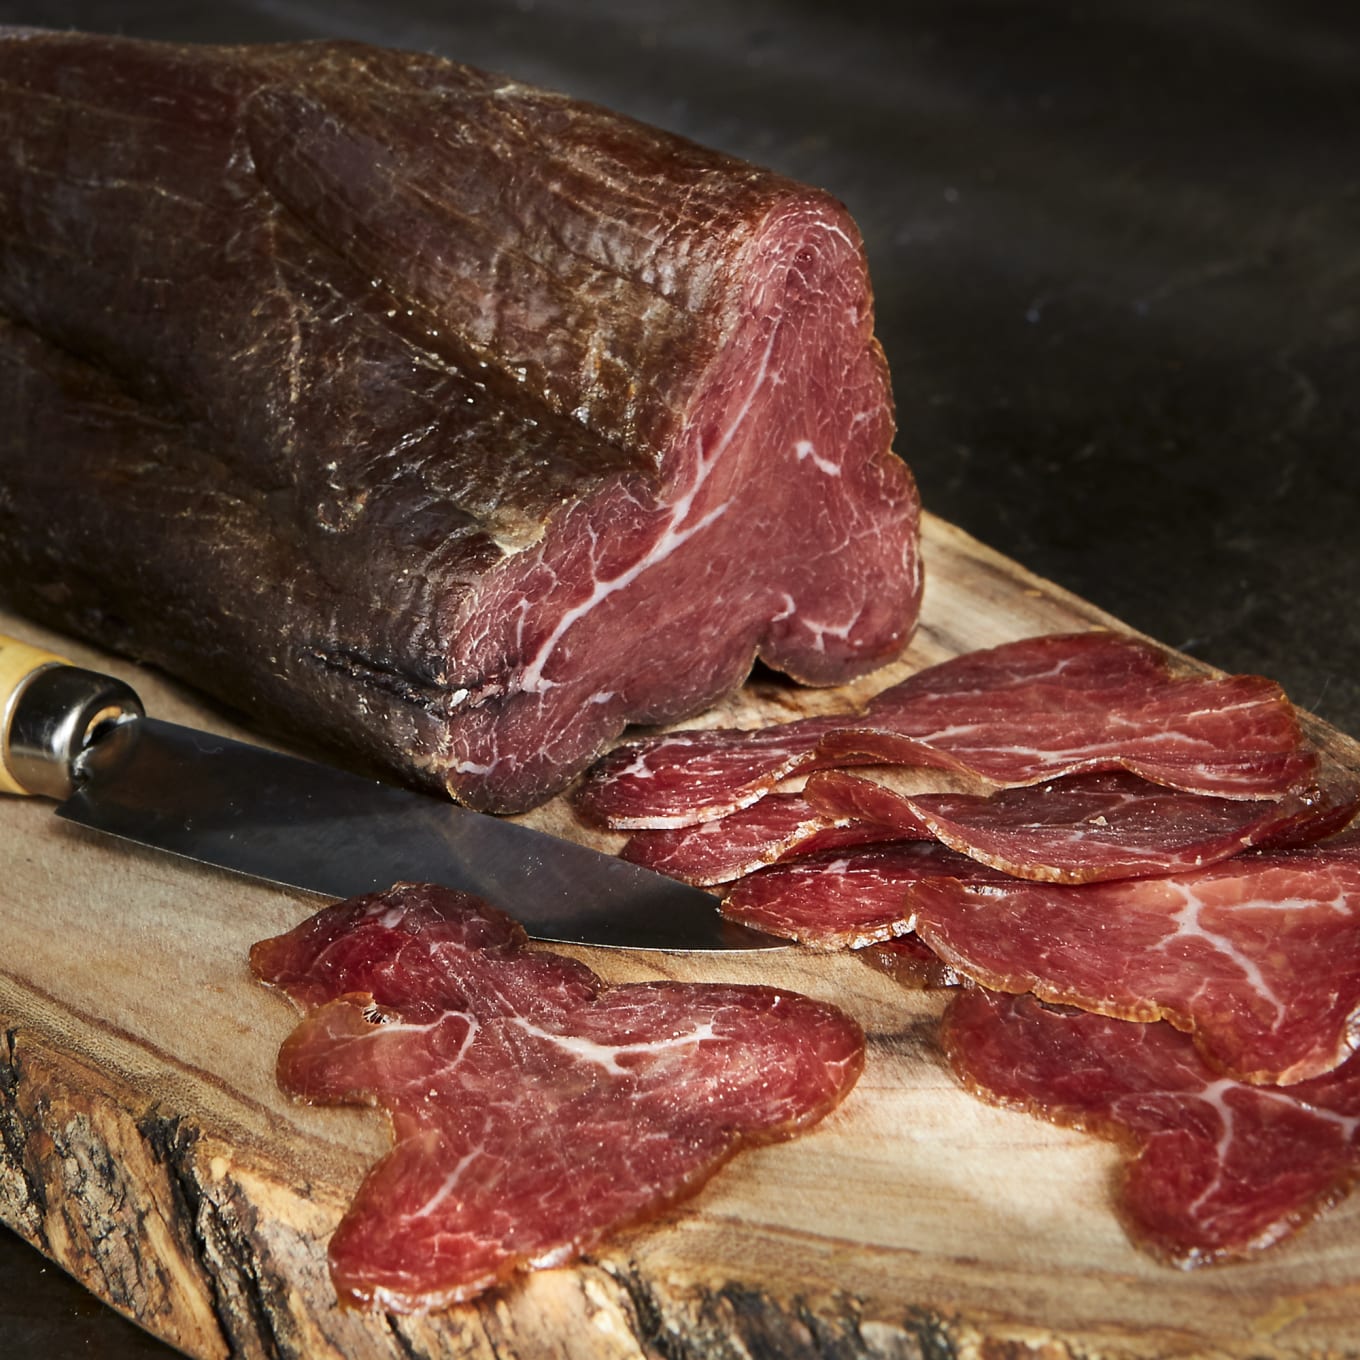 Smoked Cecina from Leon (Sliced) - Palcarsa (100 g)